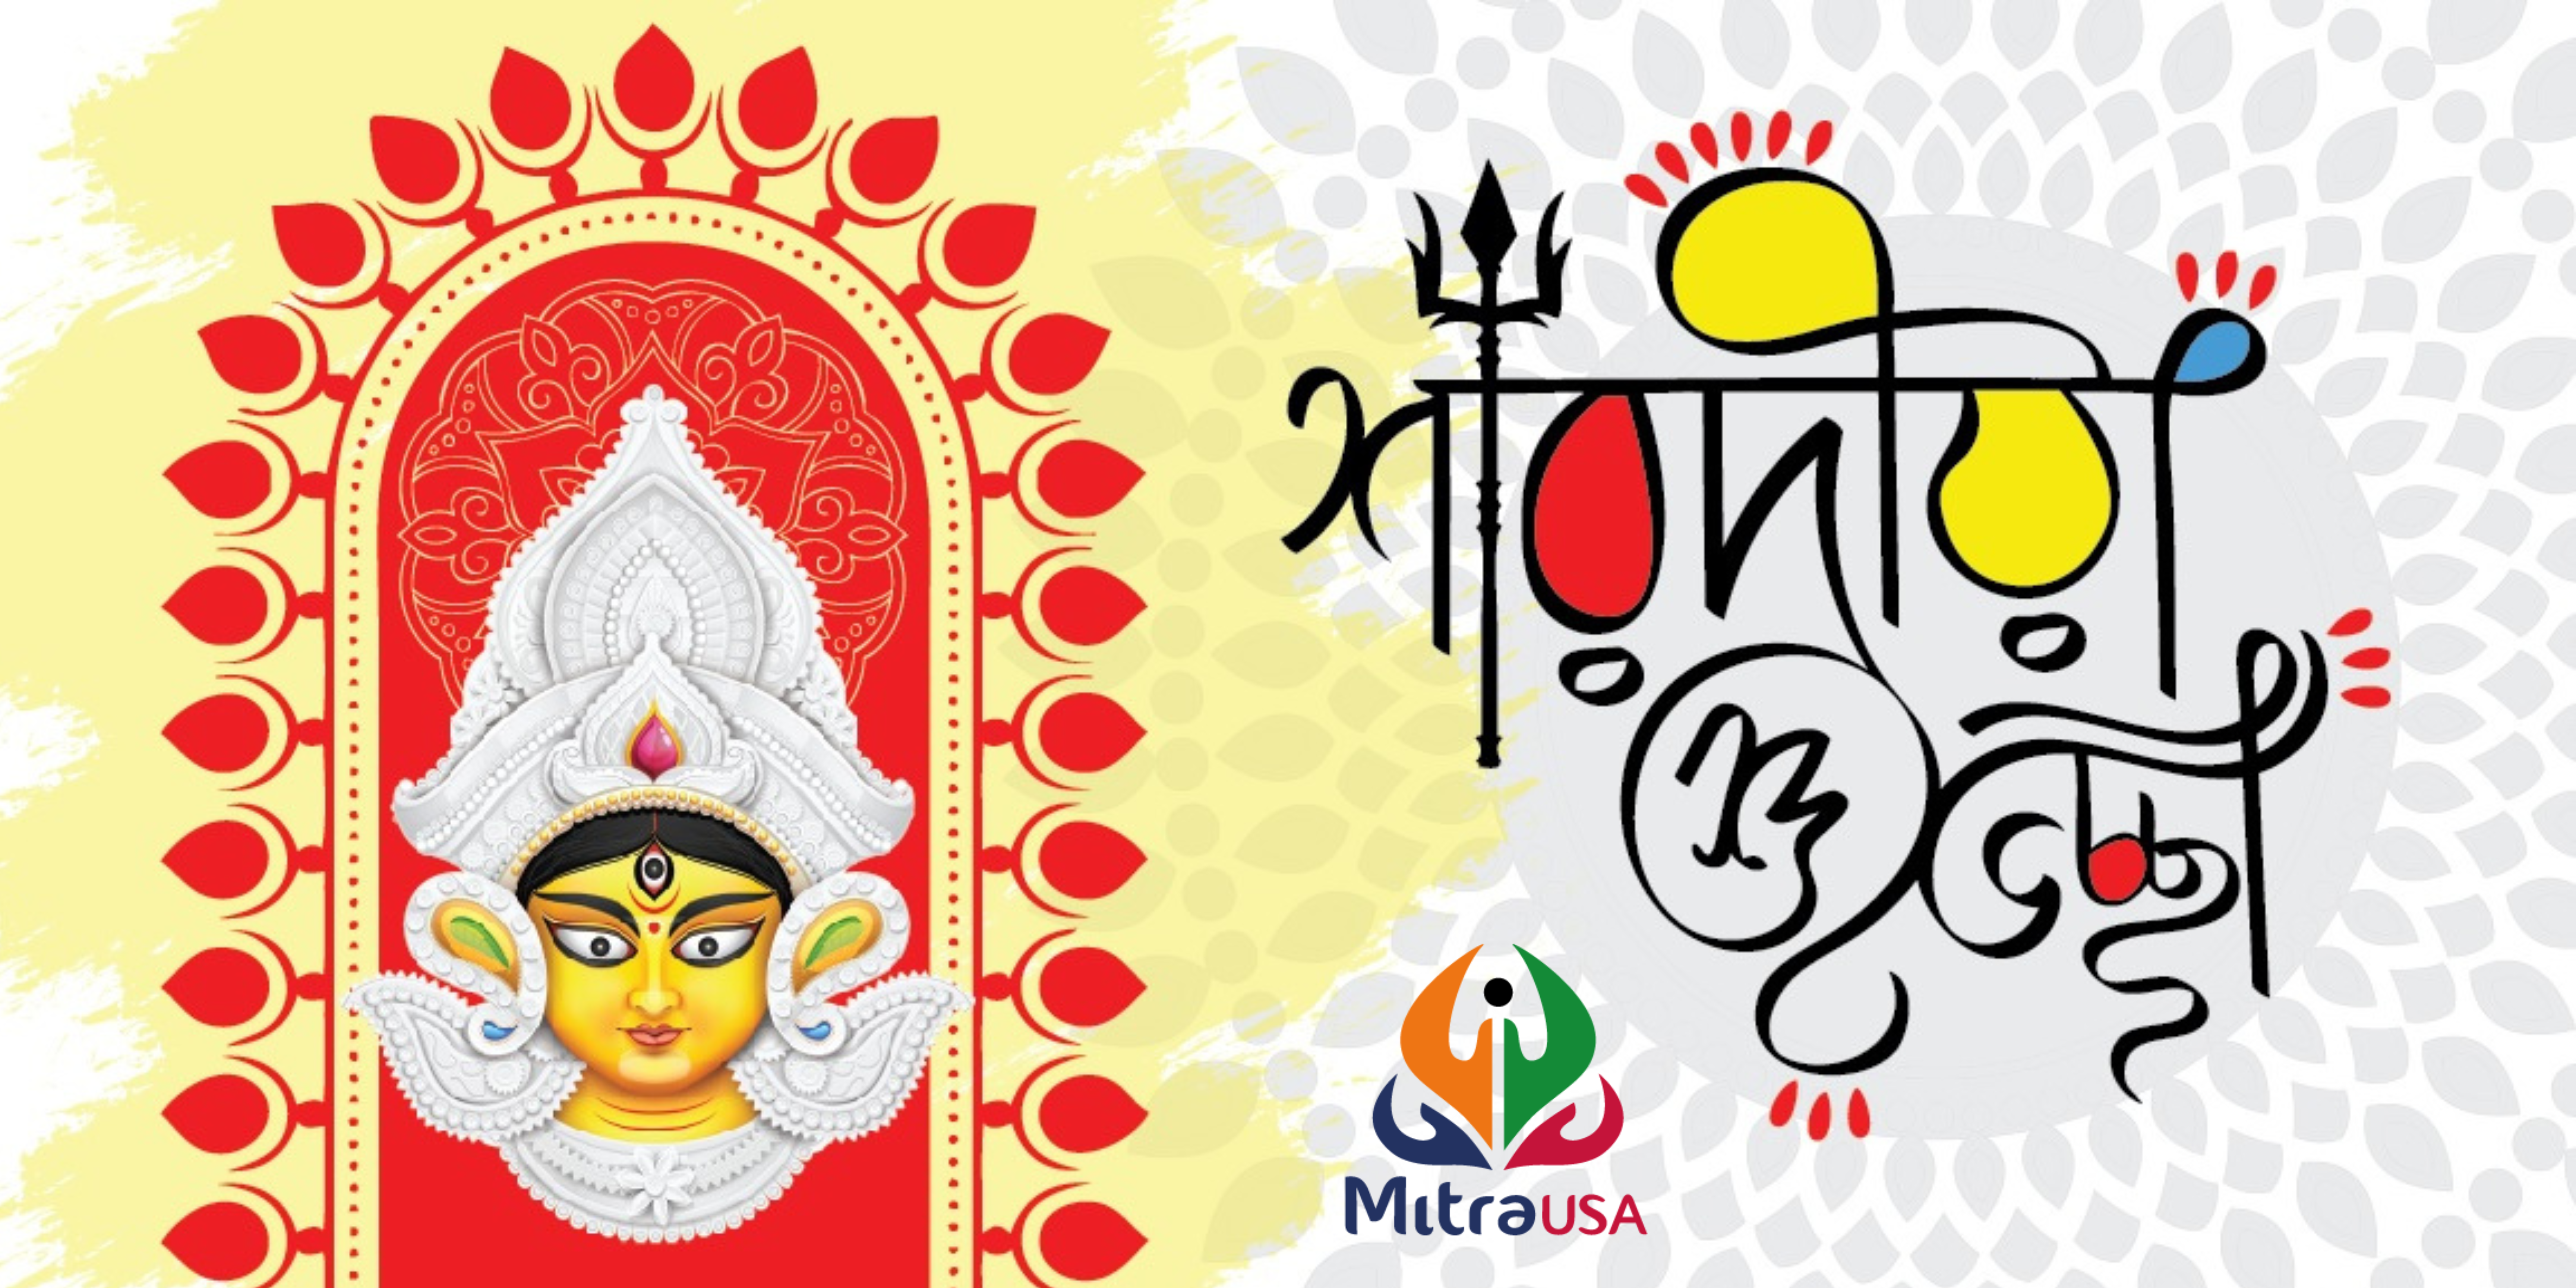 Illustration of goddess durgas face for durga puja festival posters for the  wall • posters vector, traditional, tradition | myloview.com